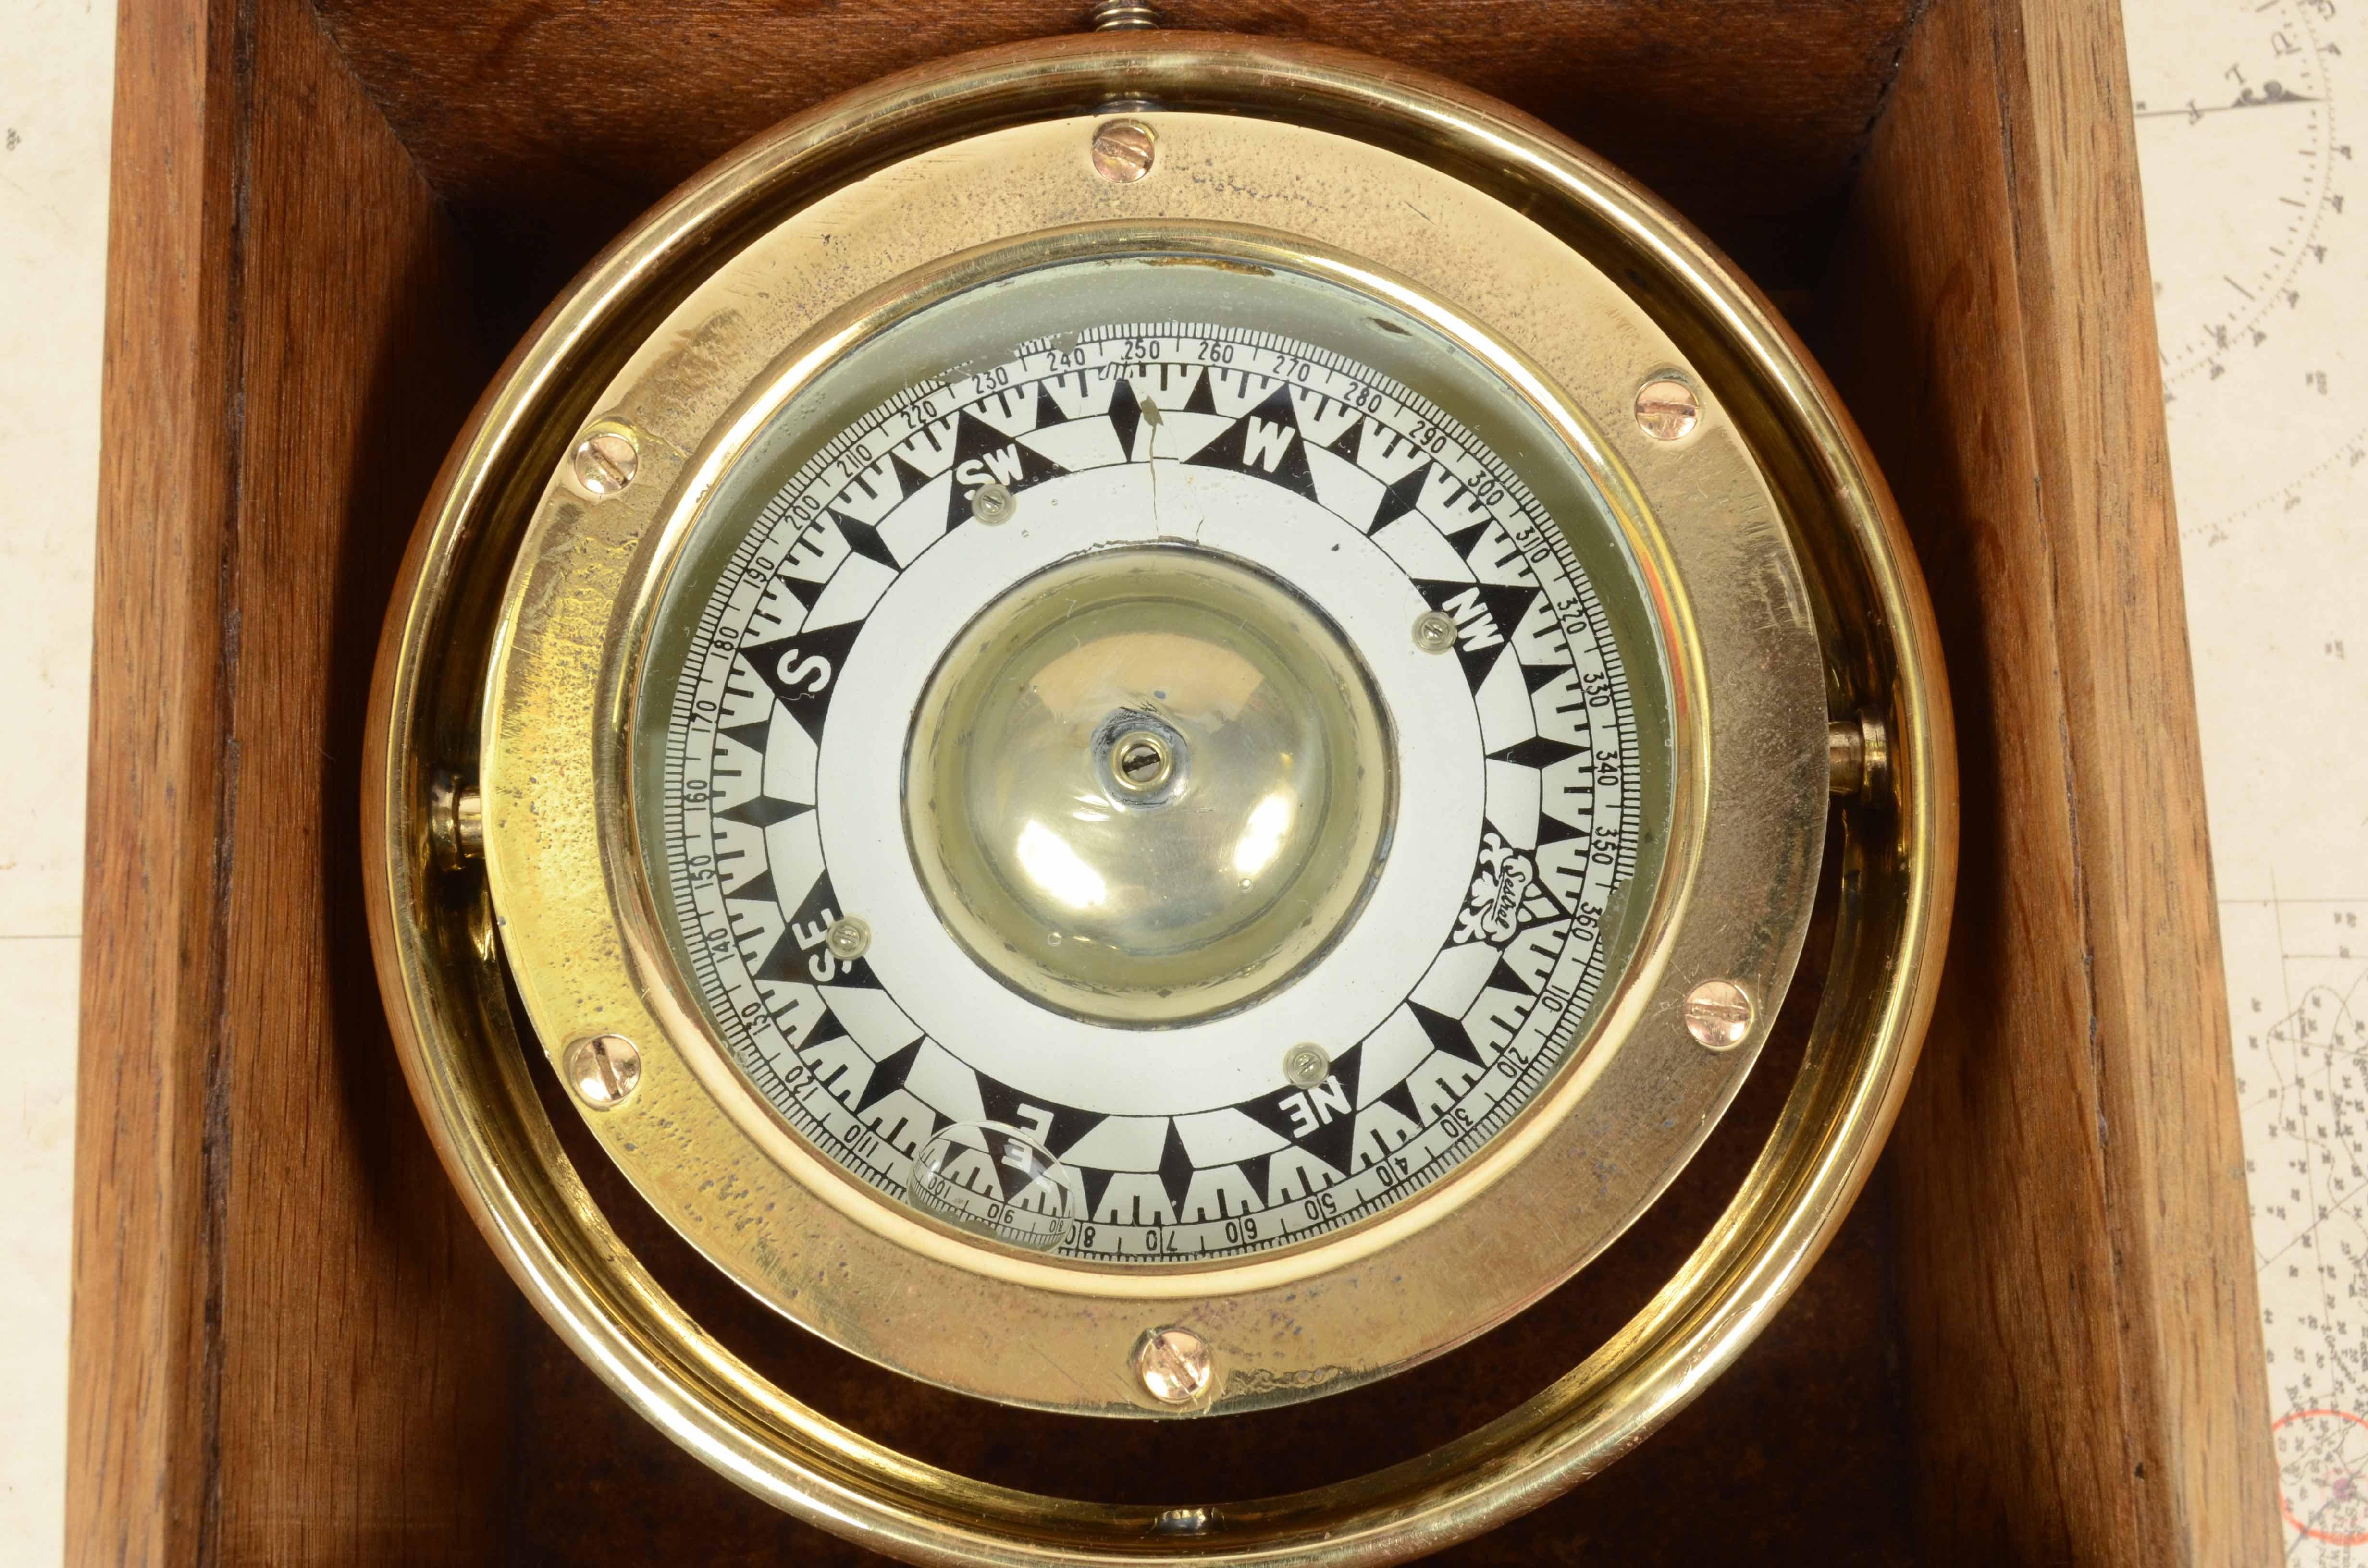 box in the compass